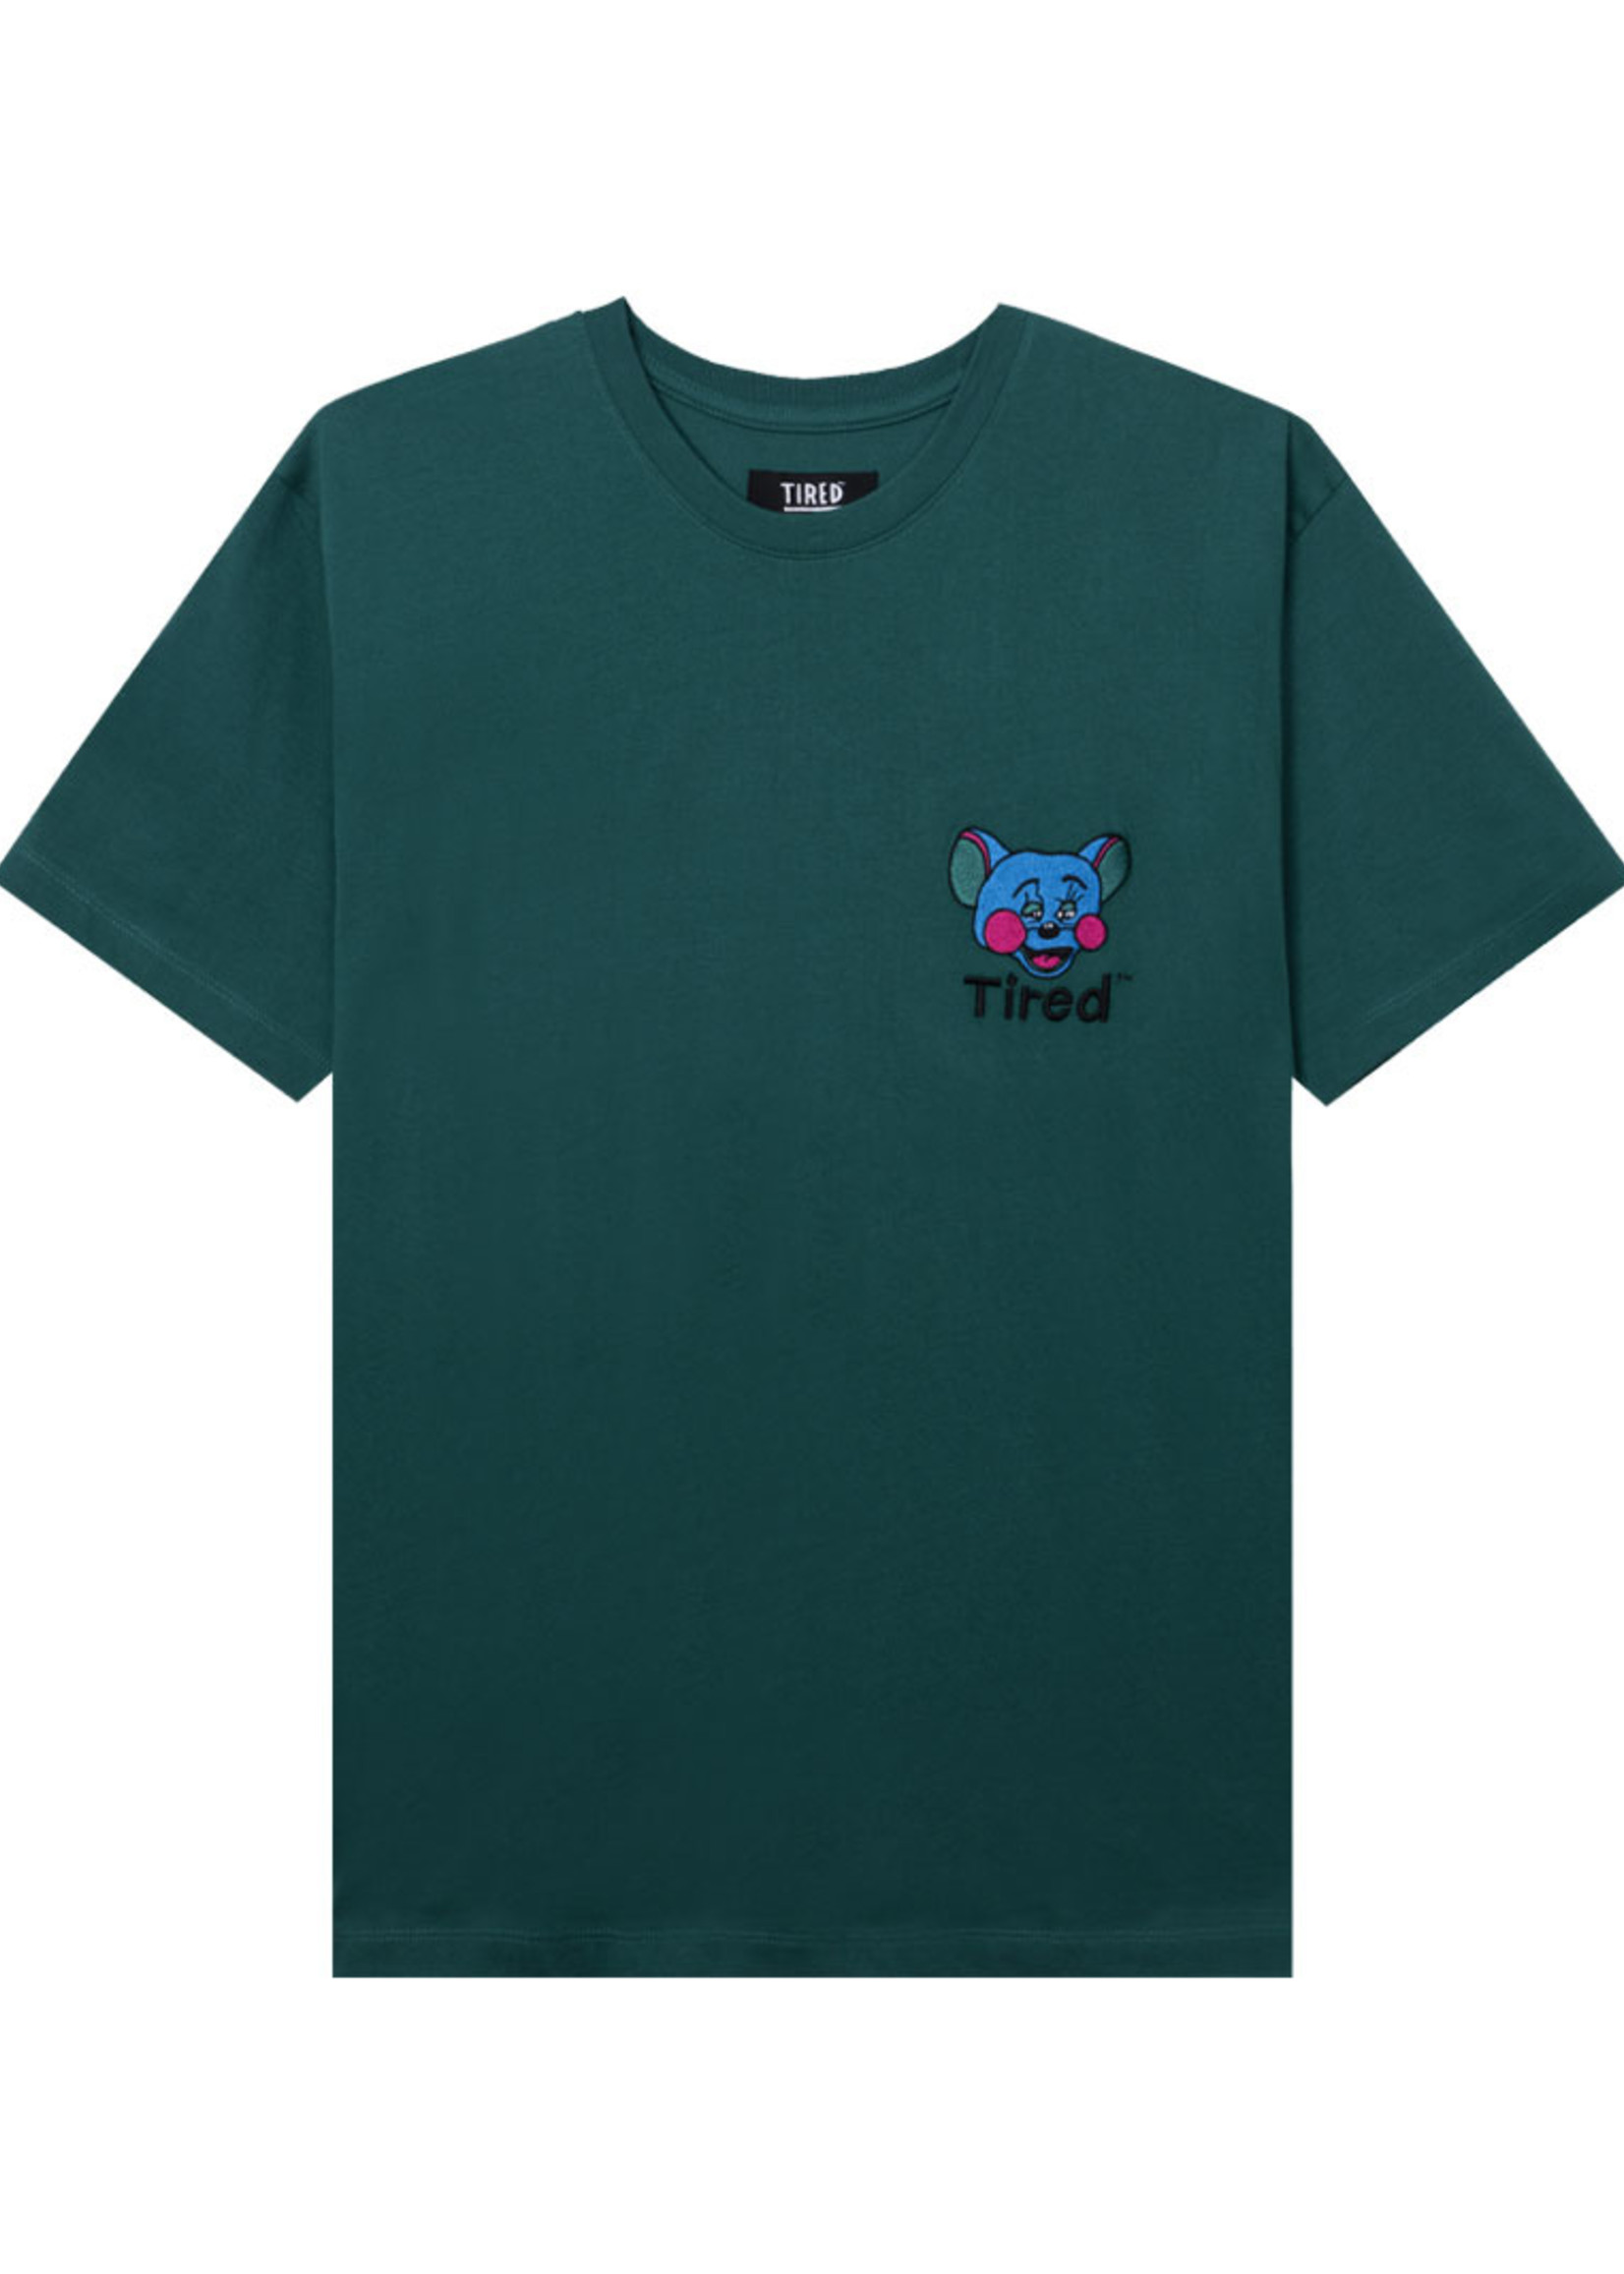 TIRED SKATEBOARDS TIPSY MOUSE EMBROIDERED TEE